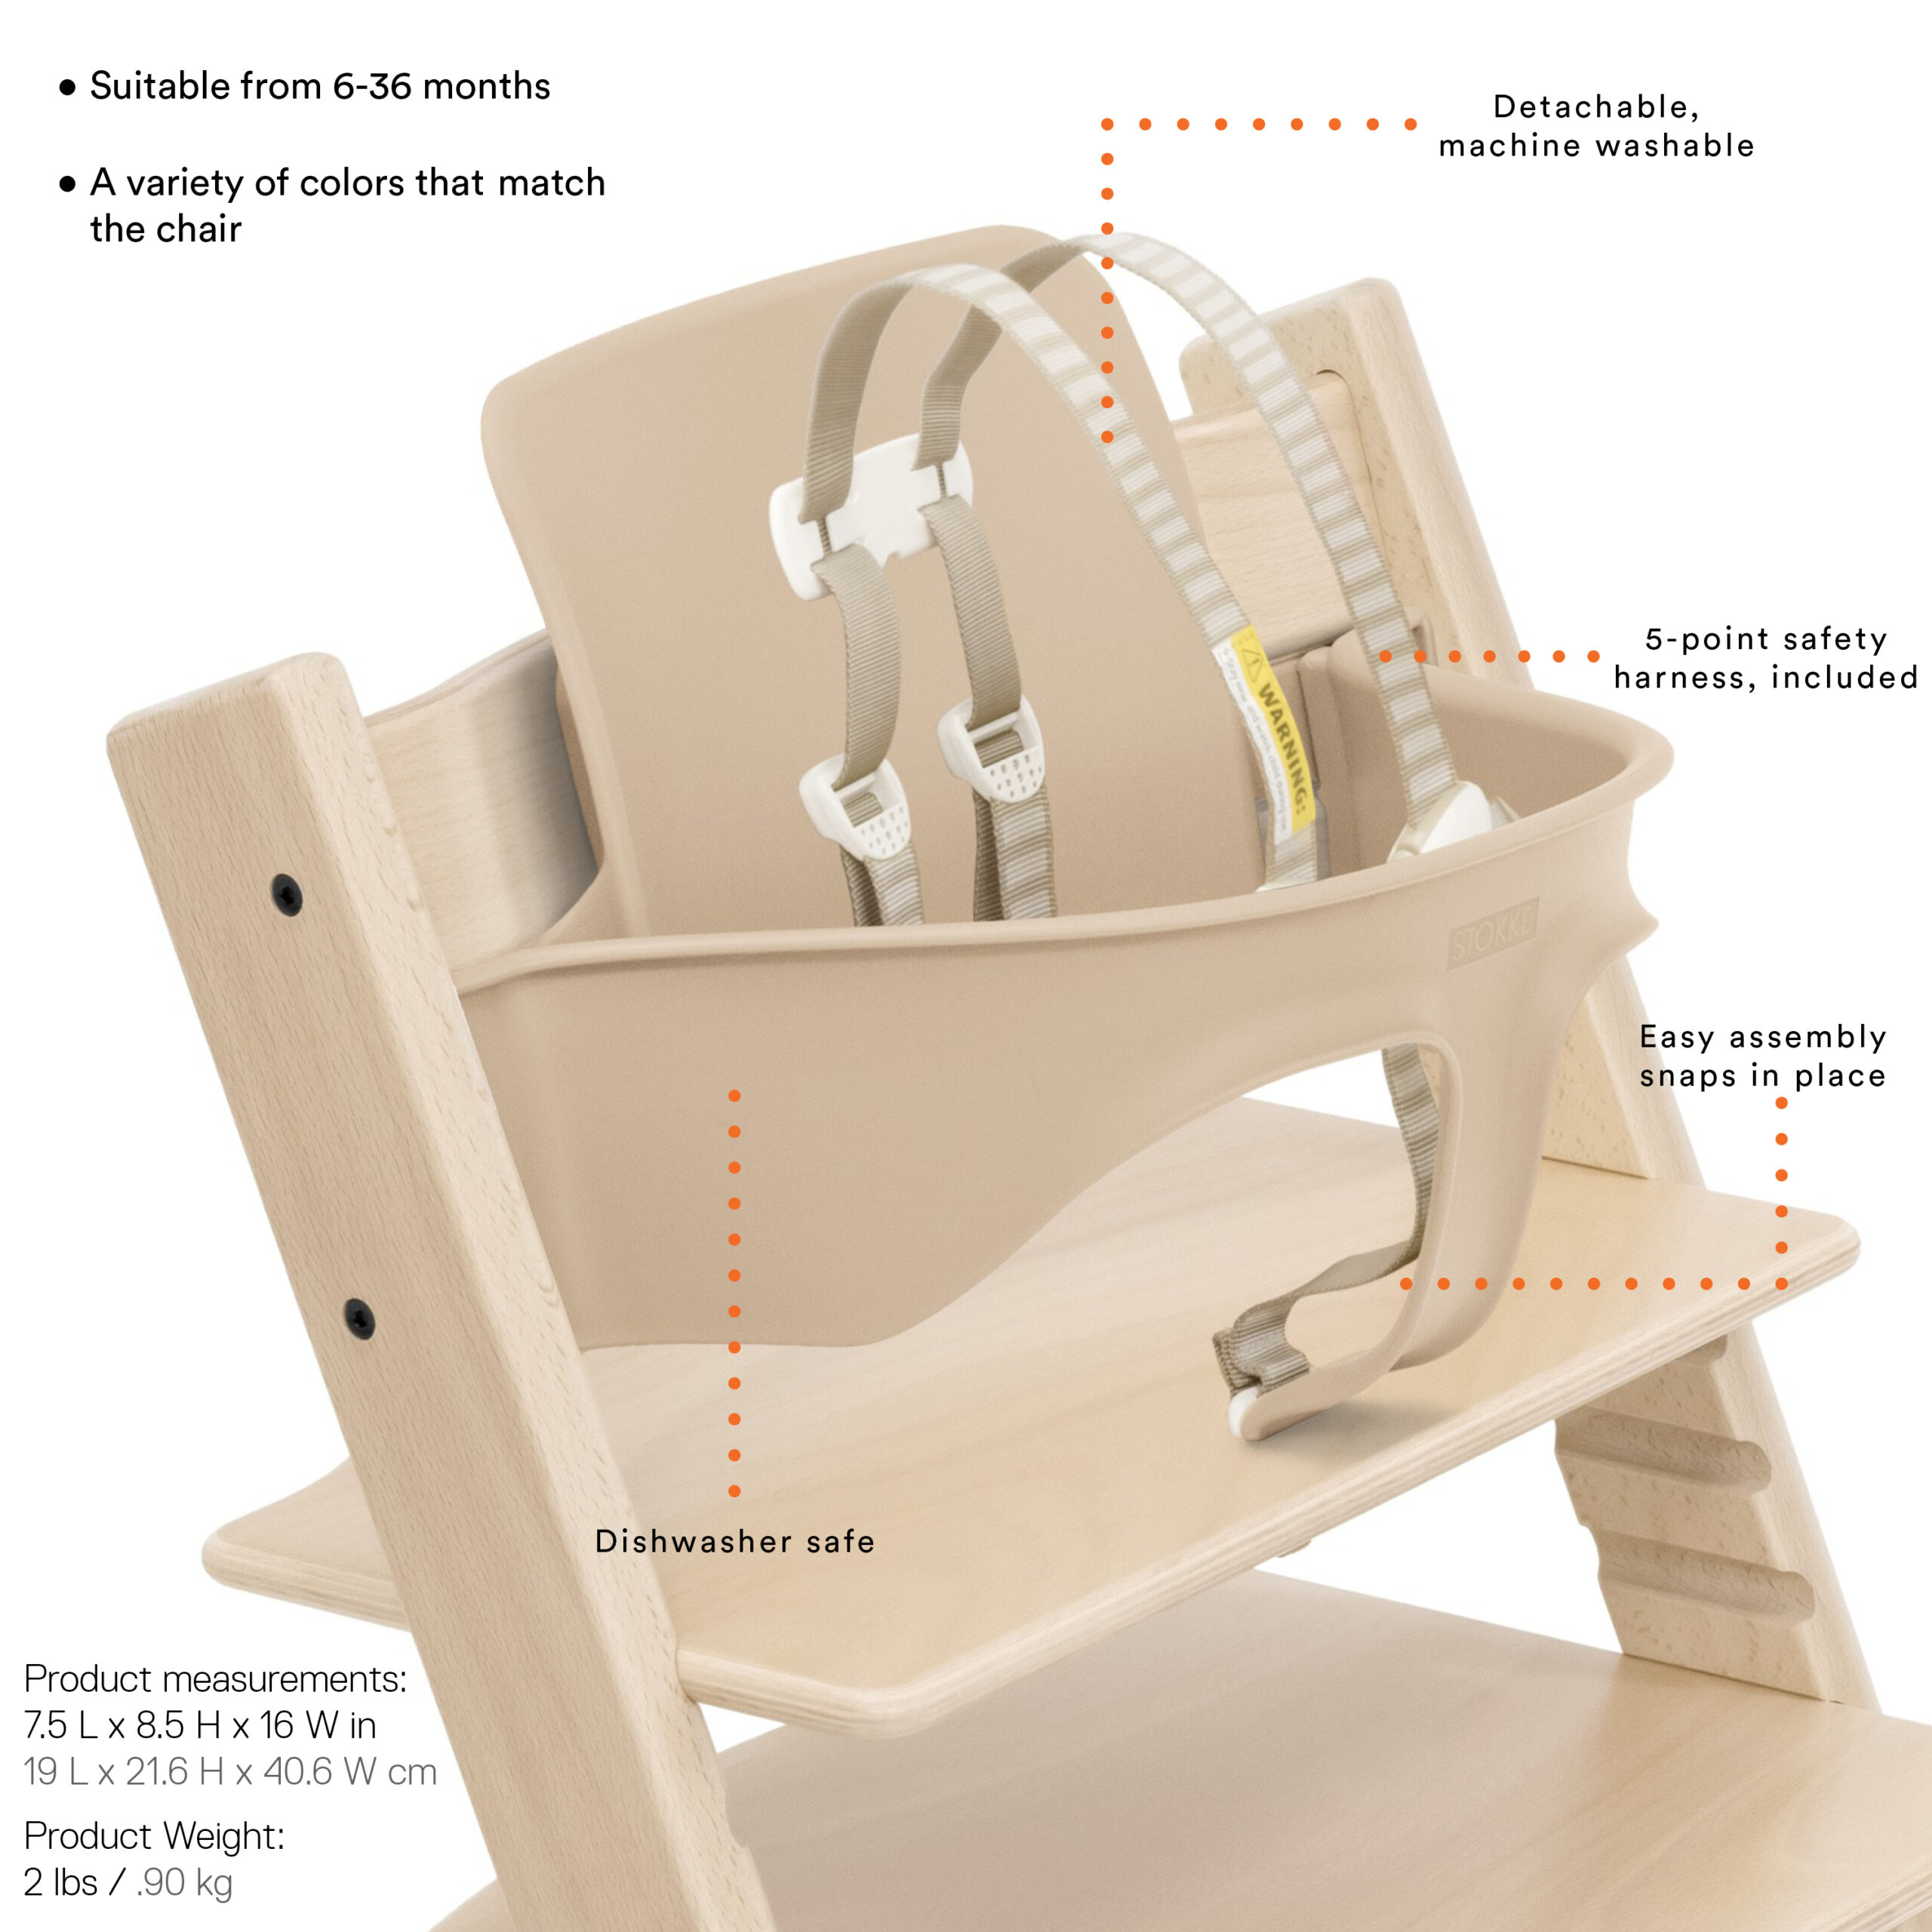 Stokke Tripp Trapp Babyset Features